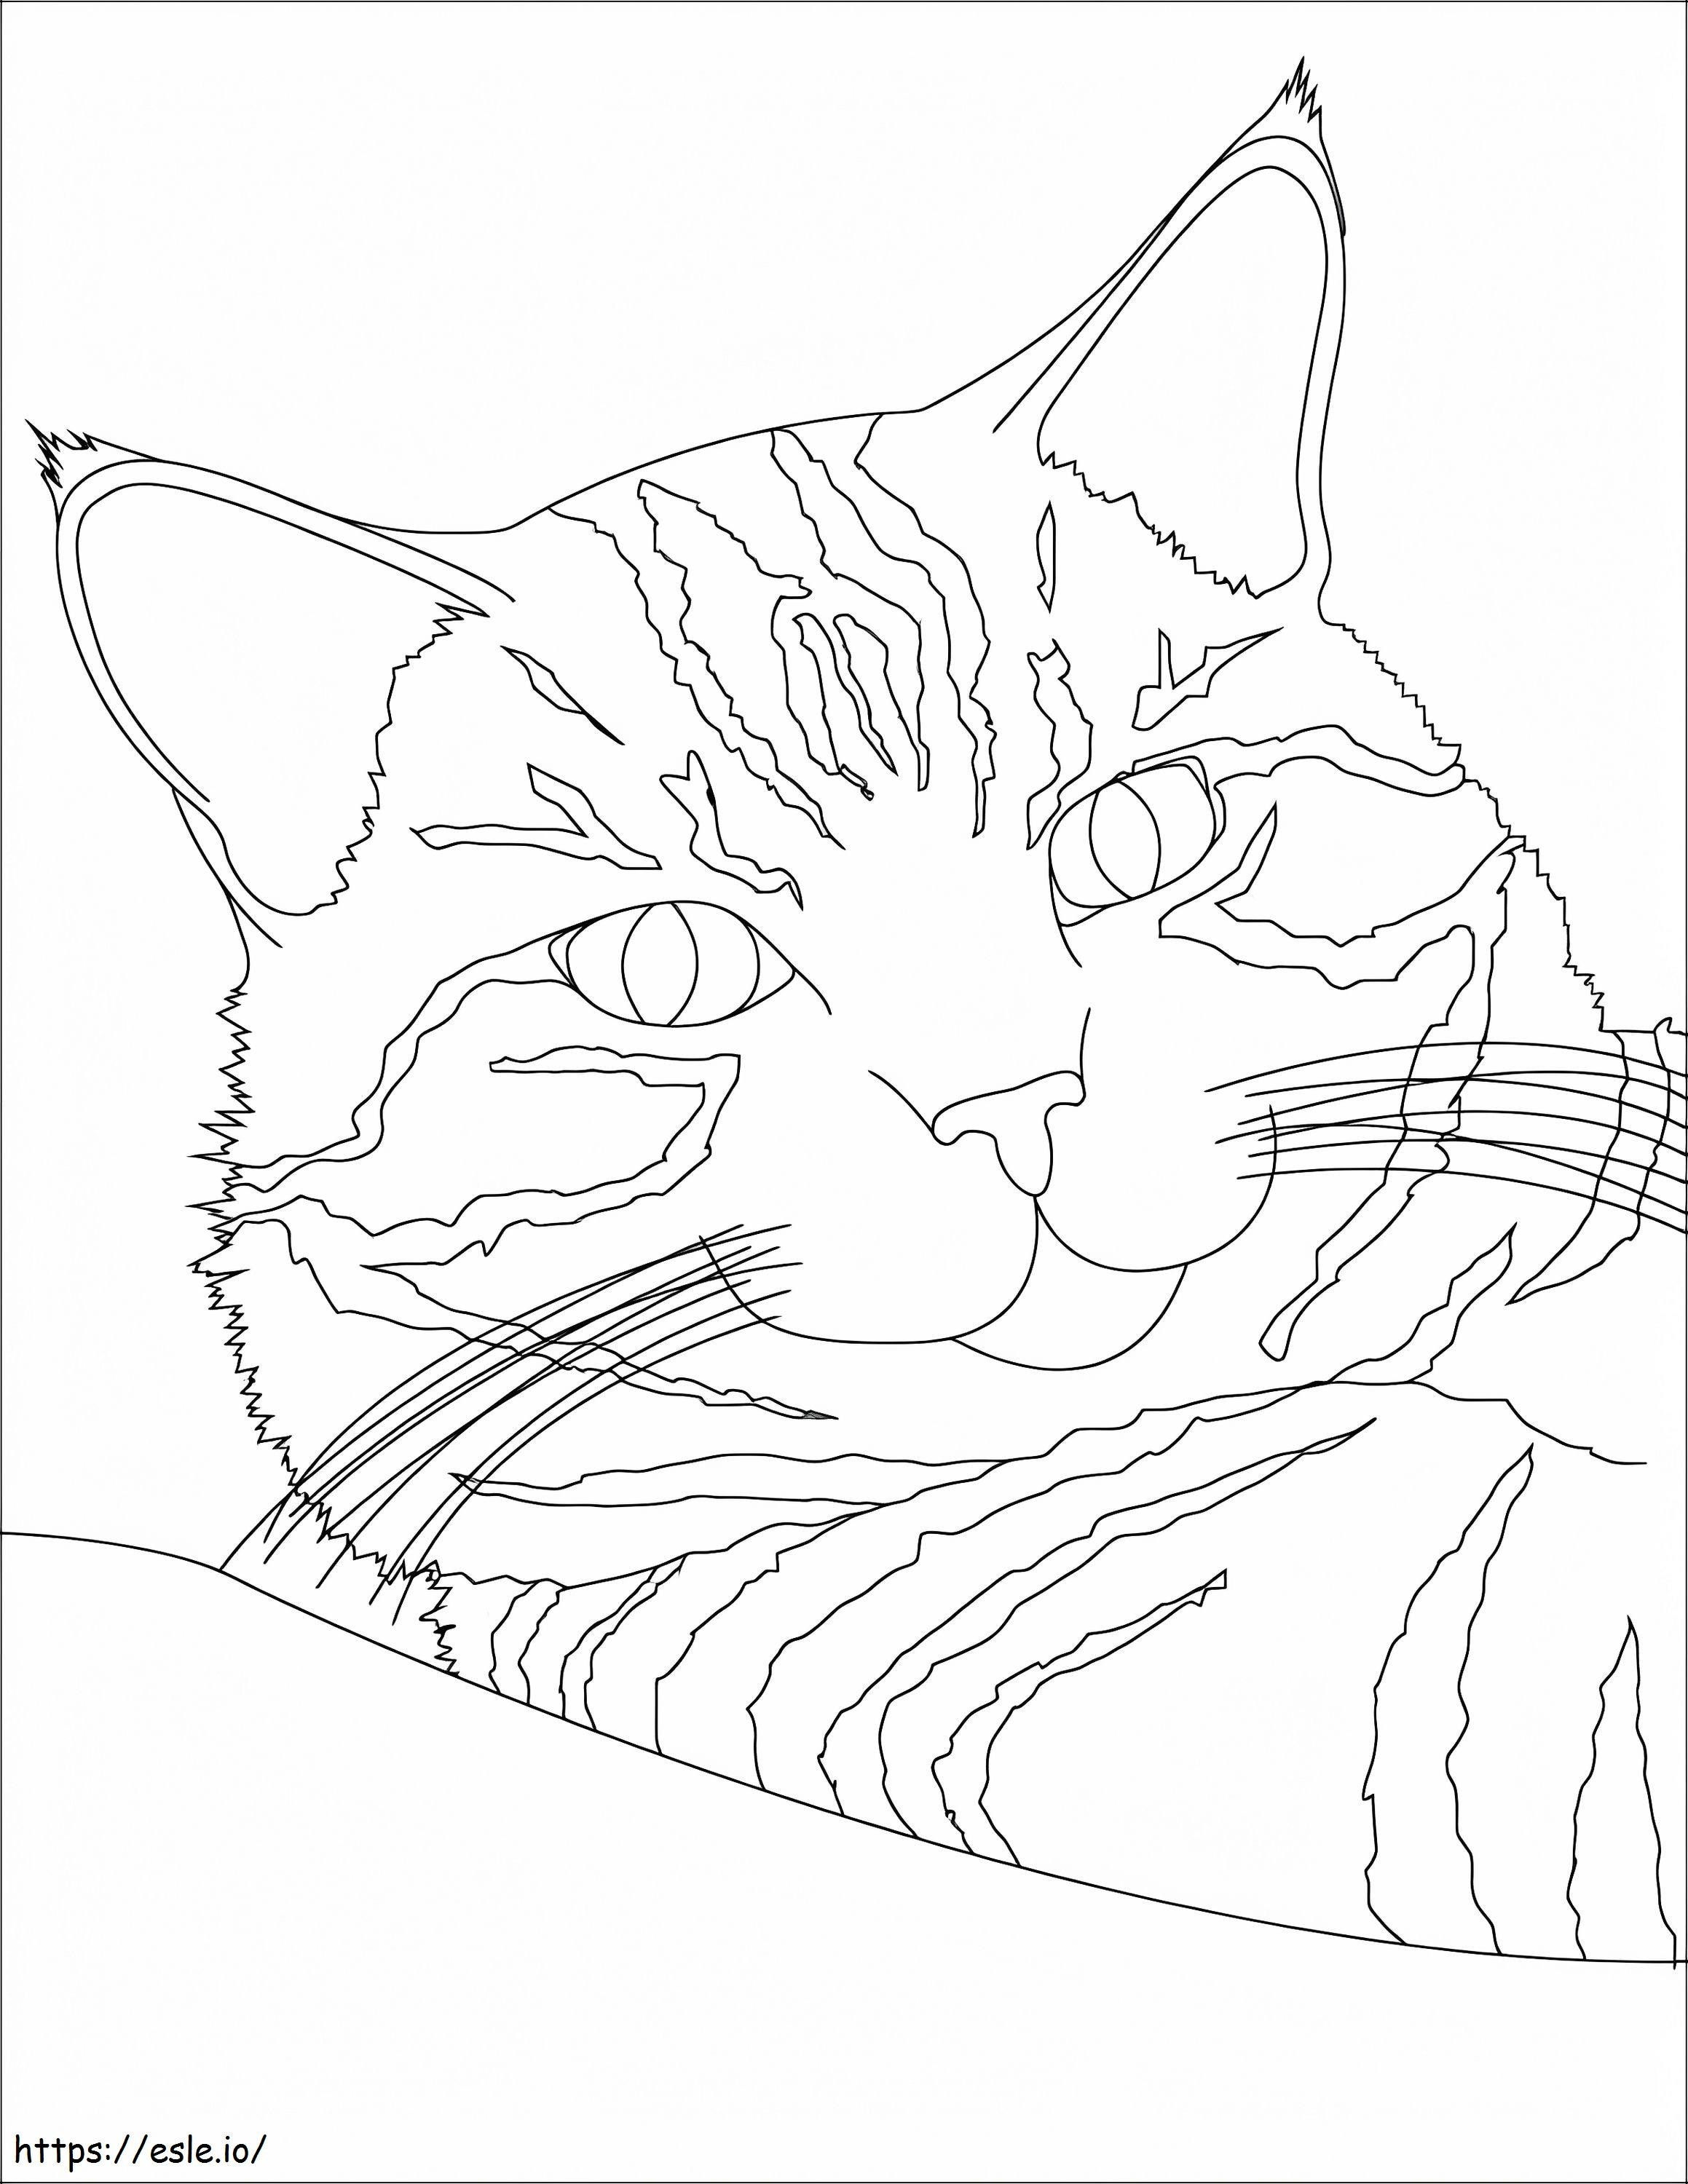 Tabby Cat coloring page